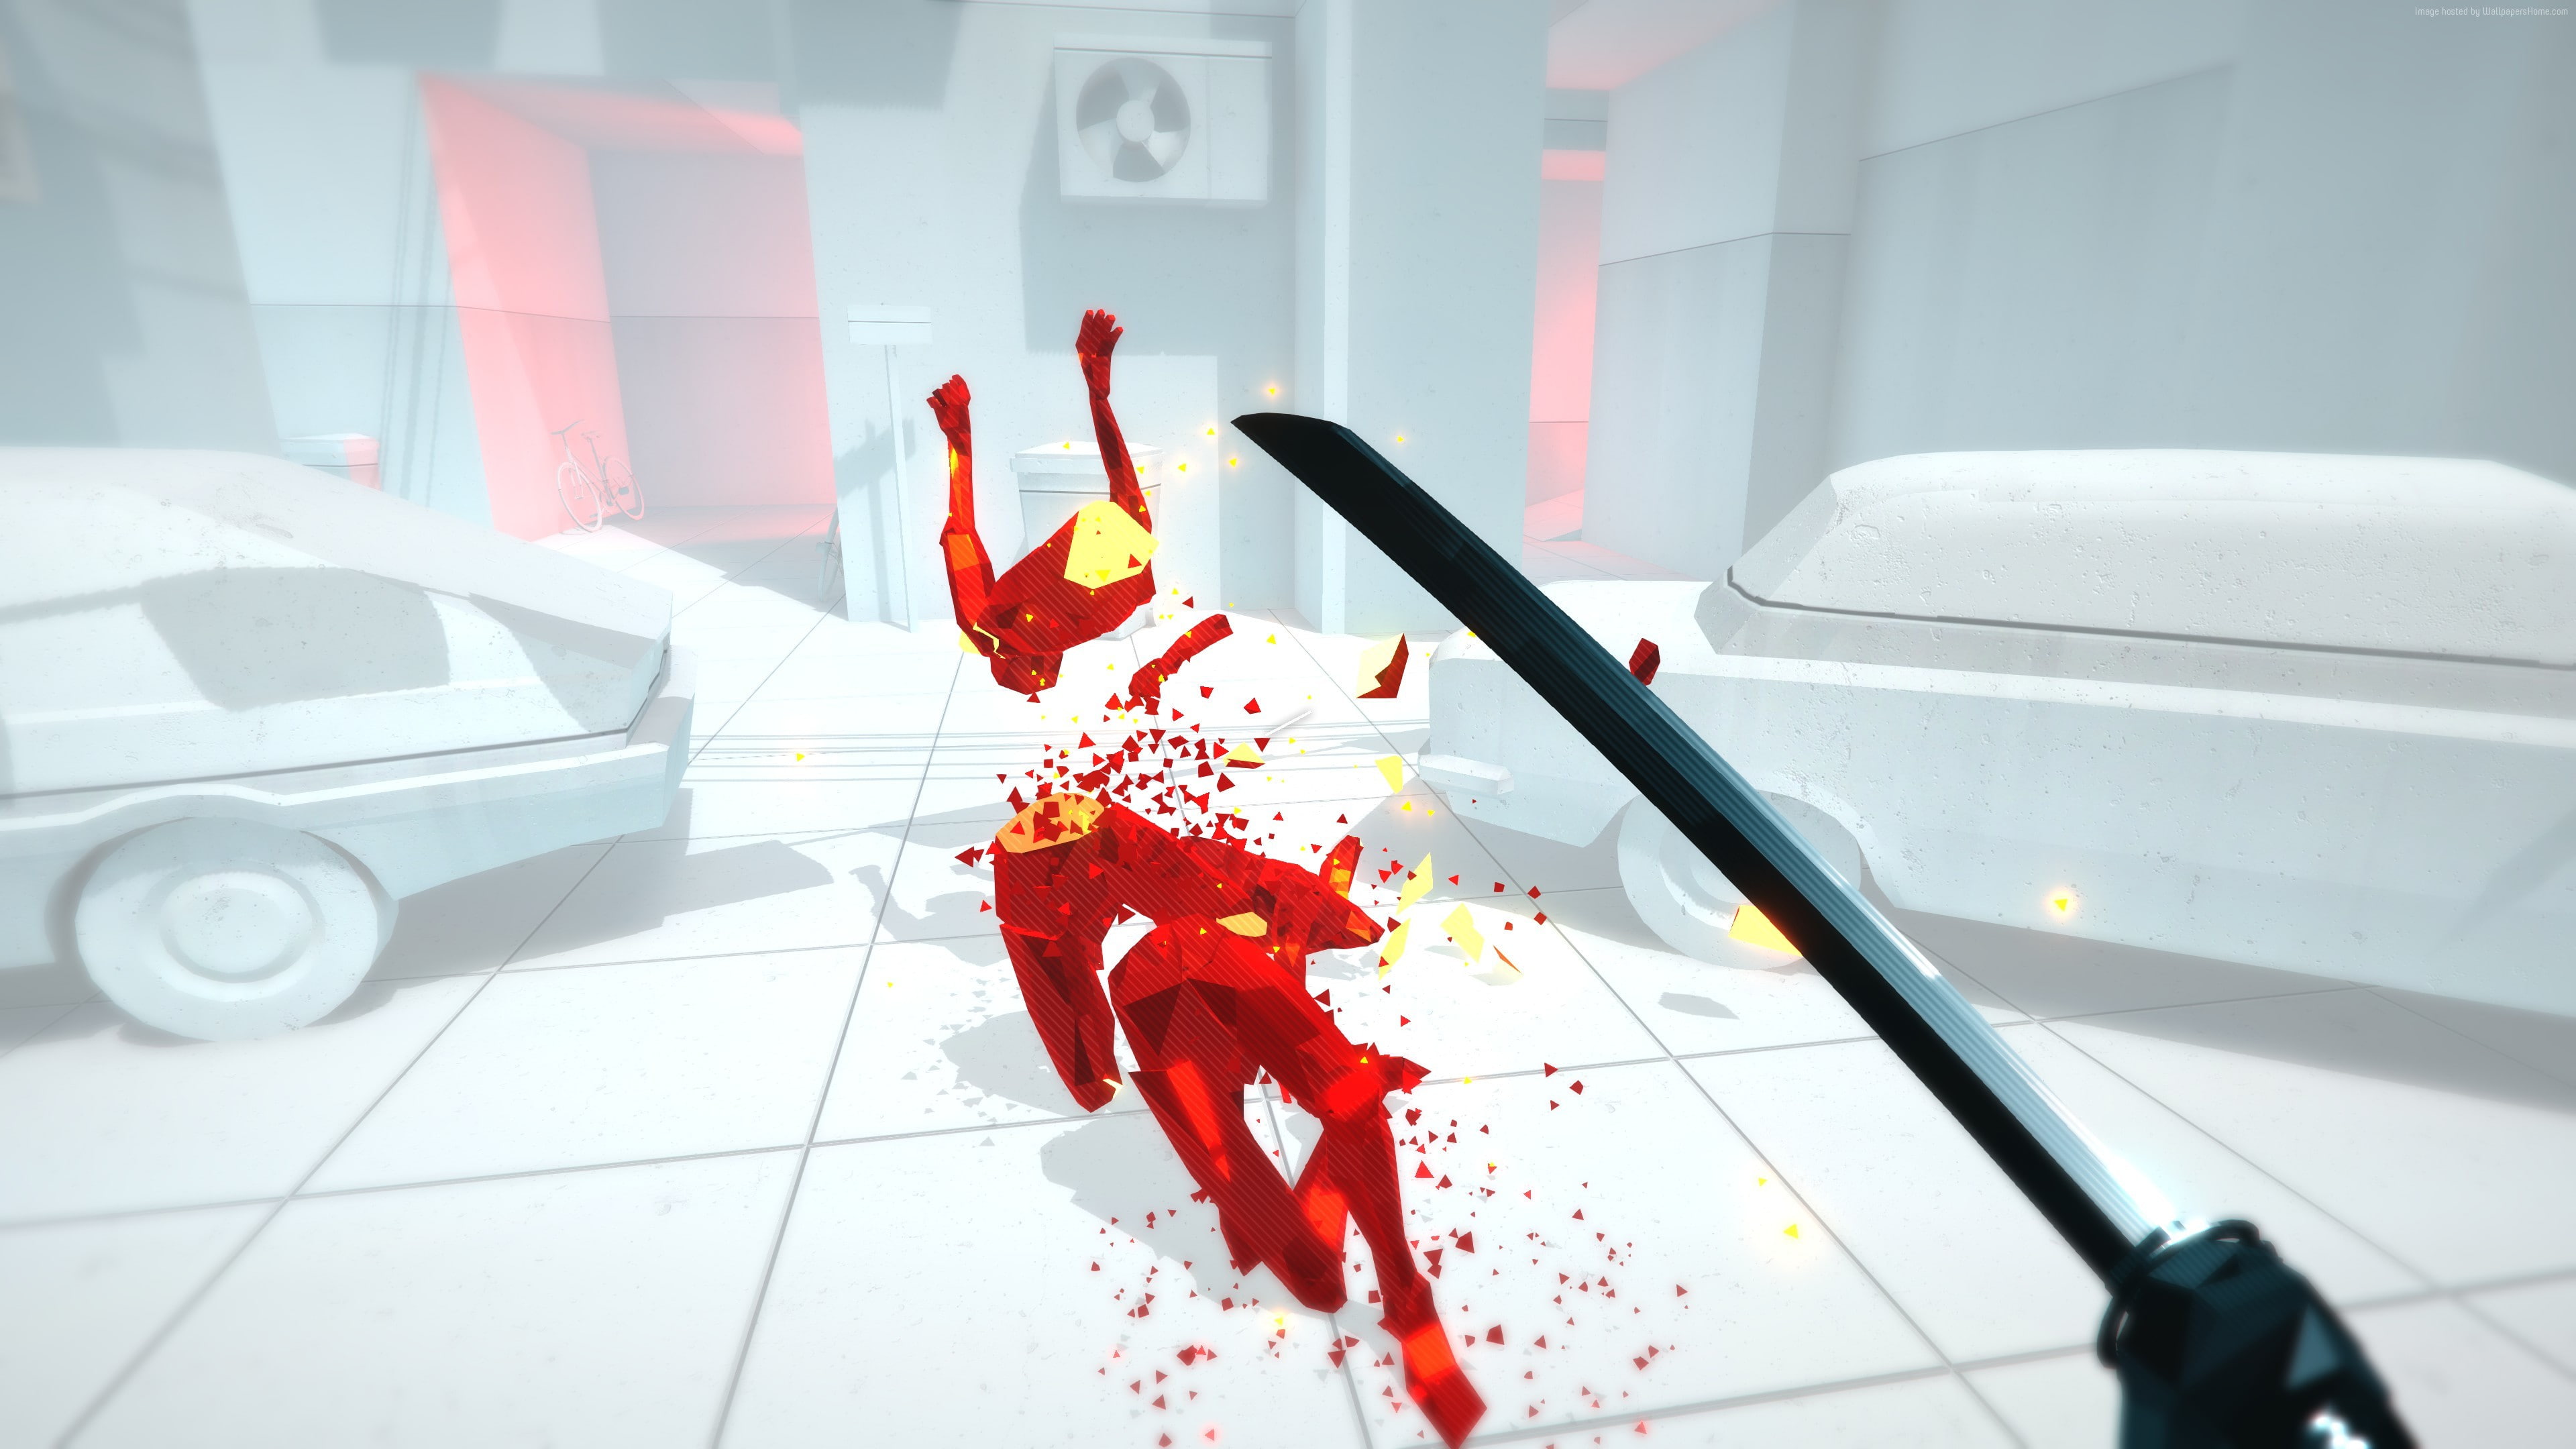 PS4, PS VR, Superhot, Oculus Touch